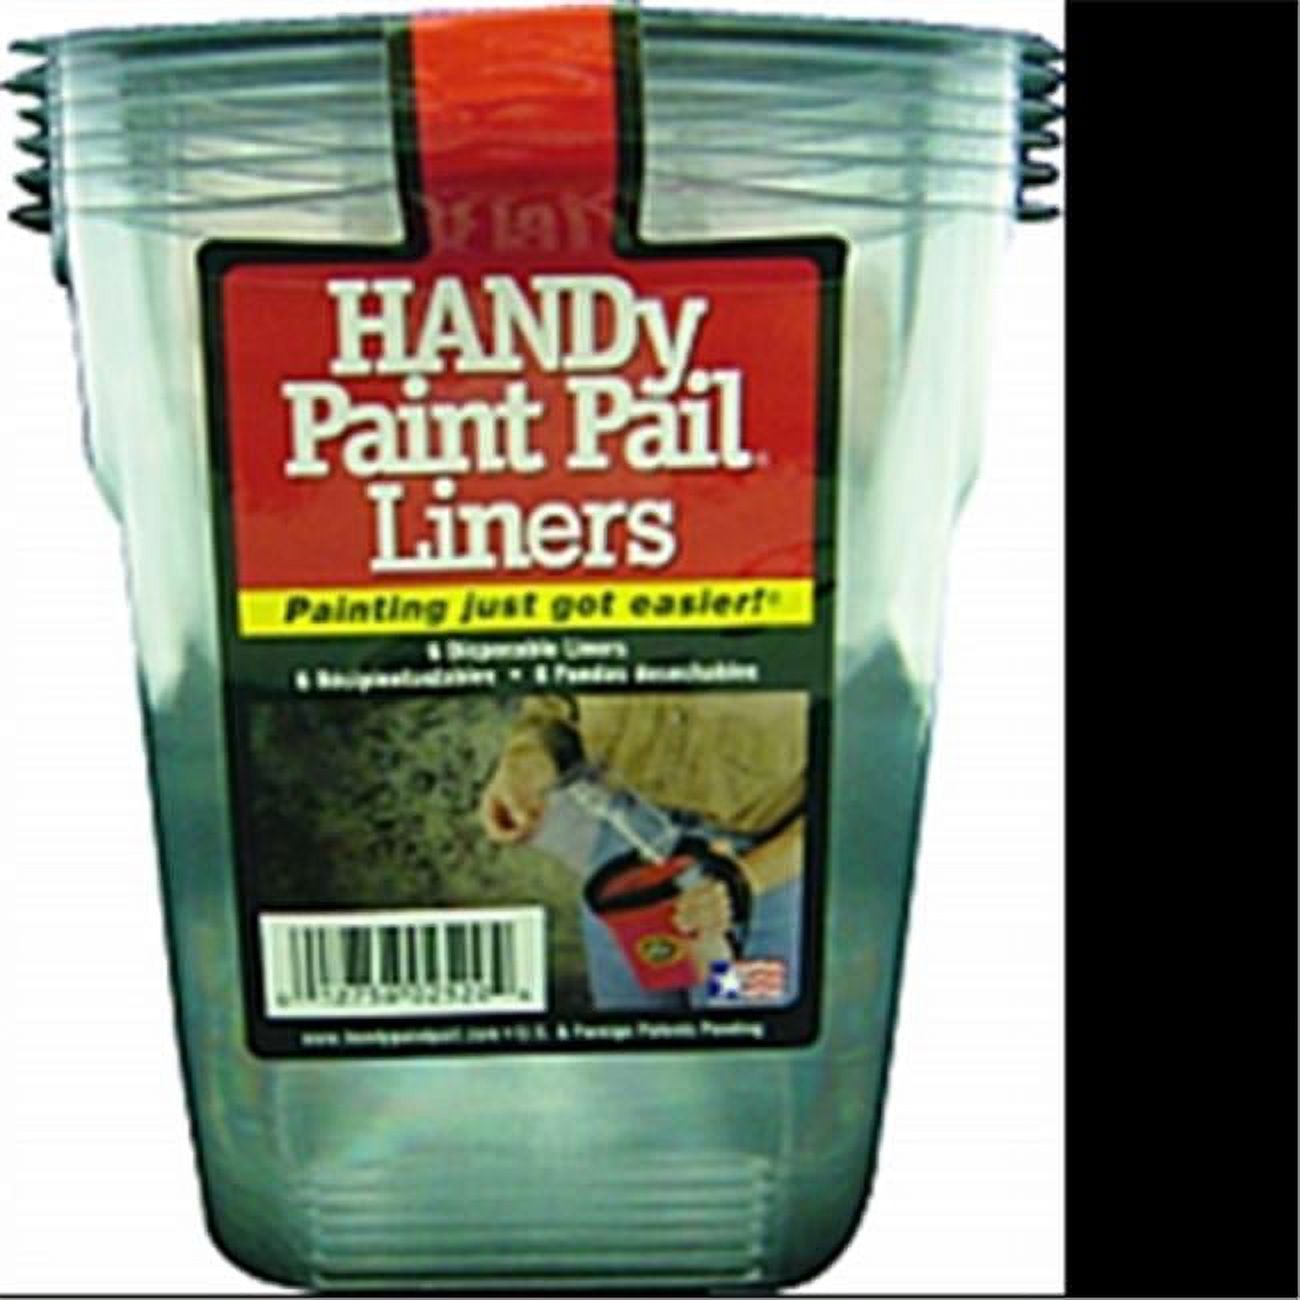 HANDy 2520-CT Paint Pail Liners, 6-Count - image 1 of 2